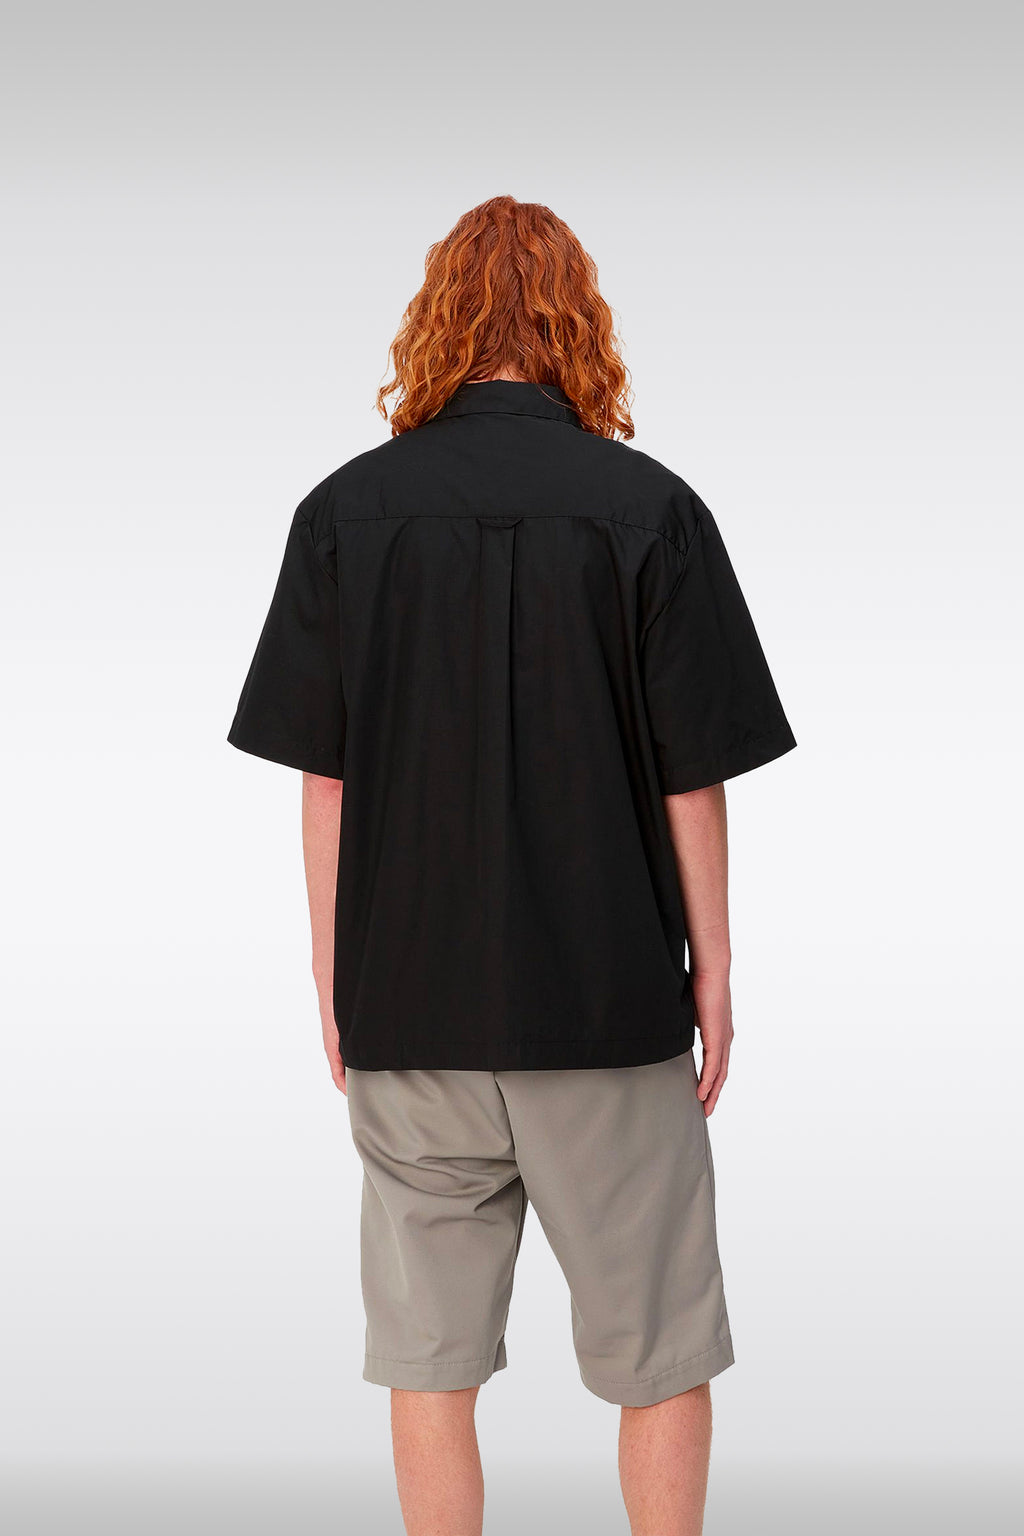 alt-image__Black-cotton-shirt-with-short-sleeves---S/S-Craft-Shirt